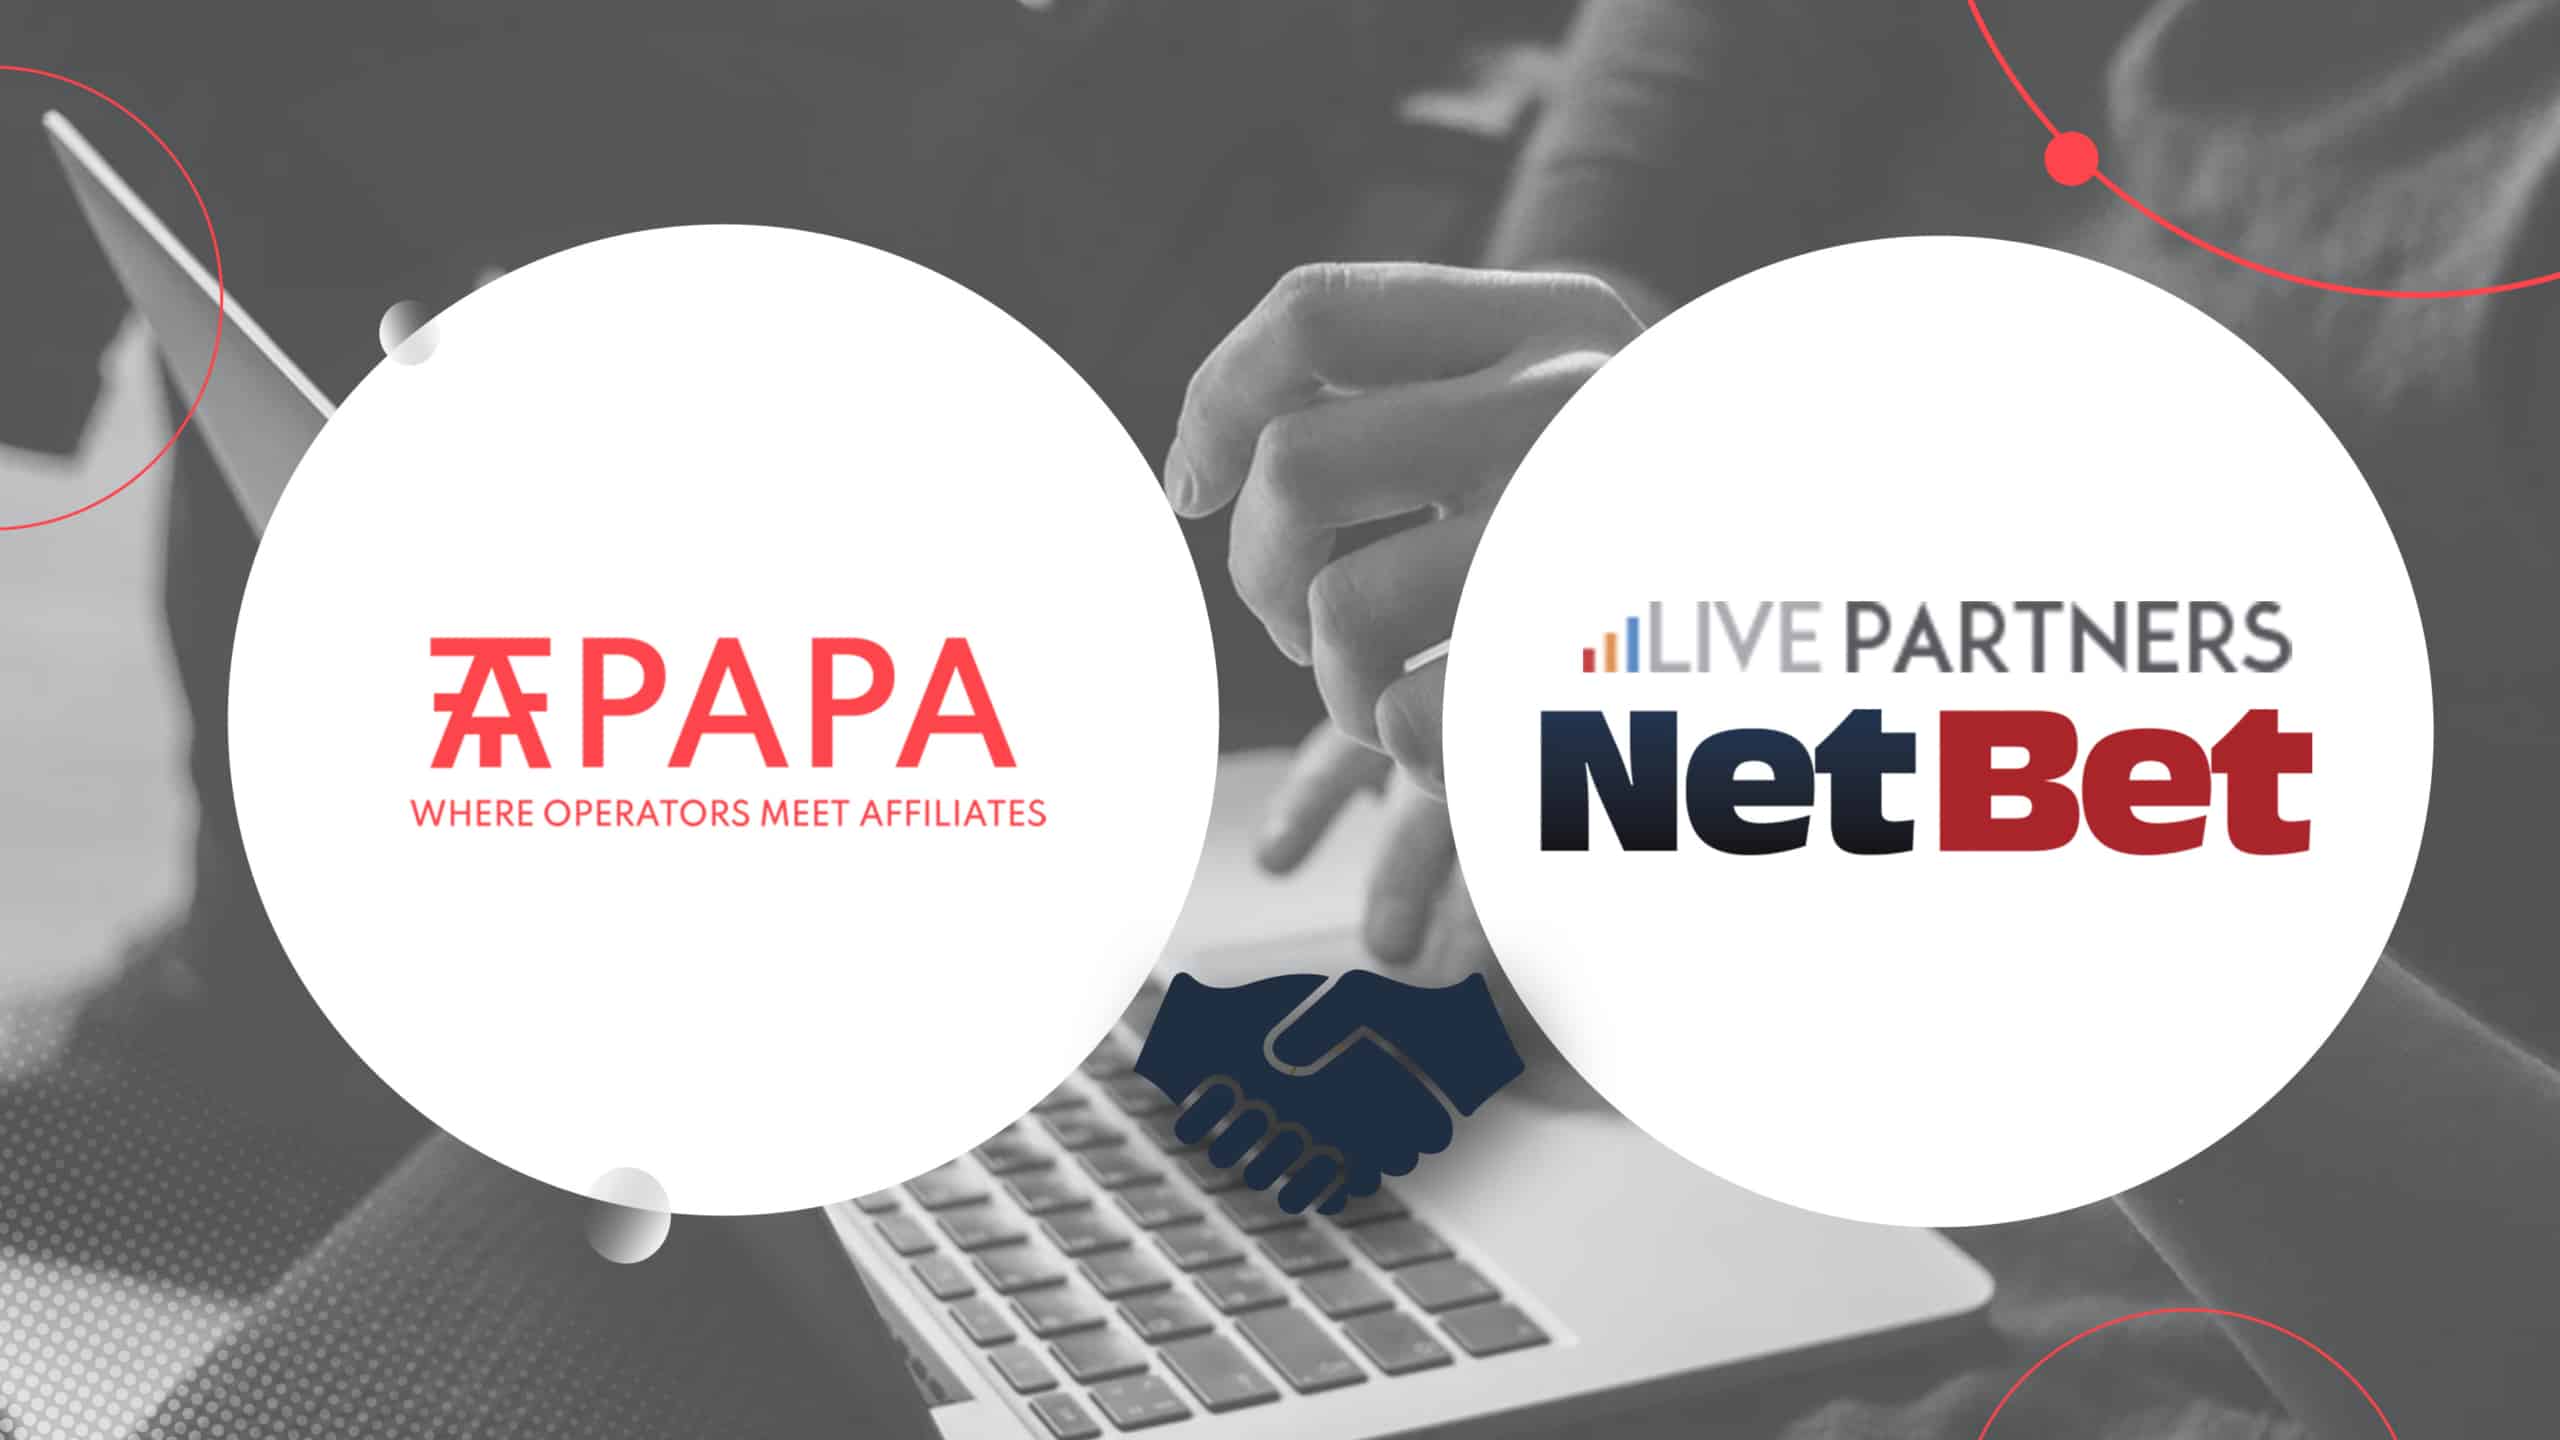 AffPapa announces year-long partnership with LivePartners